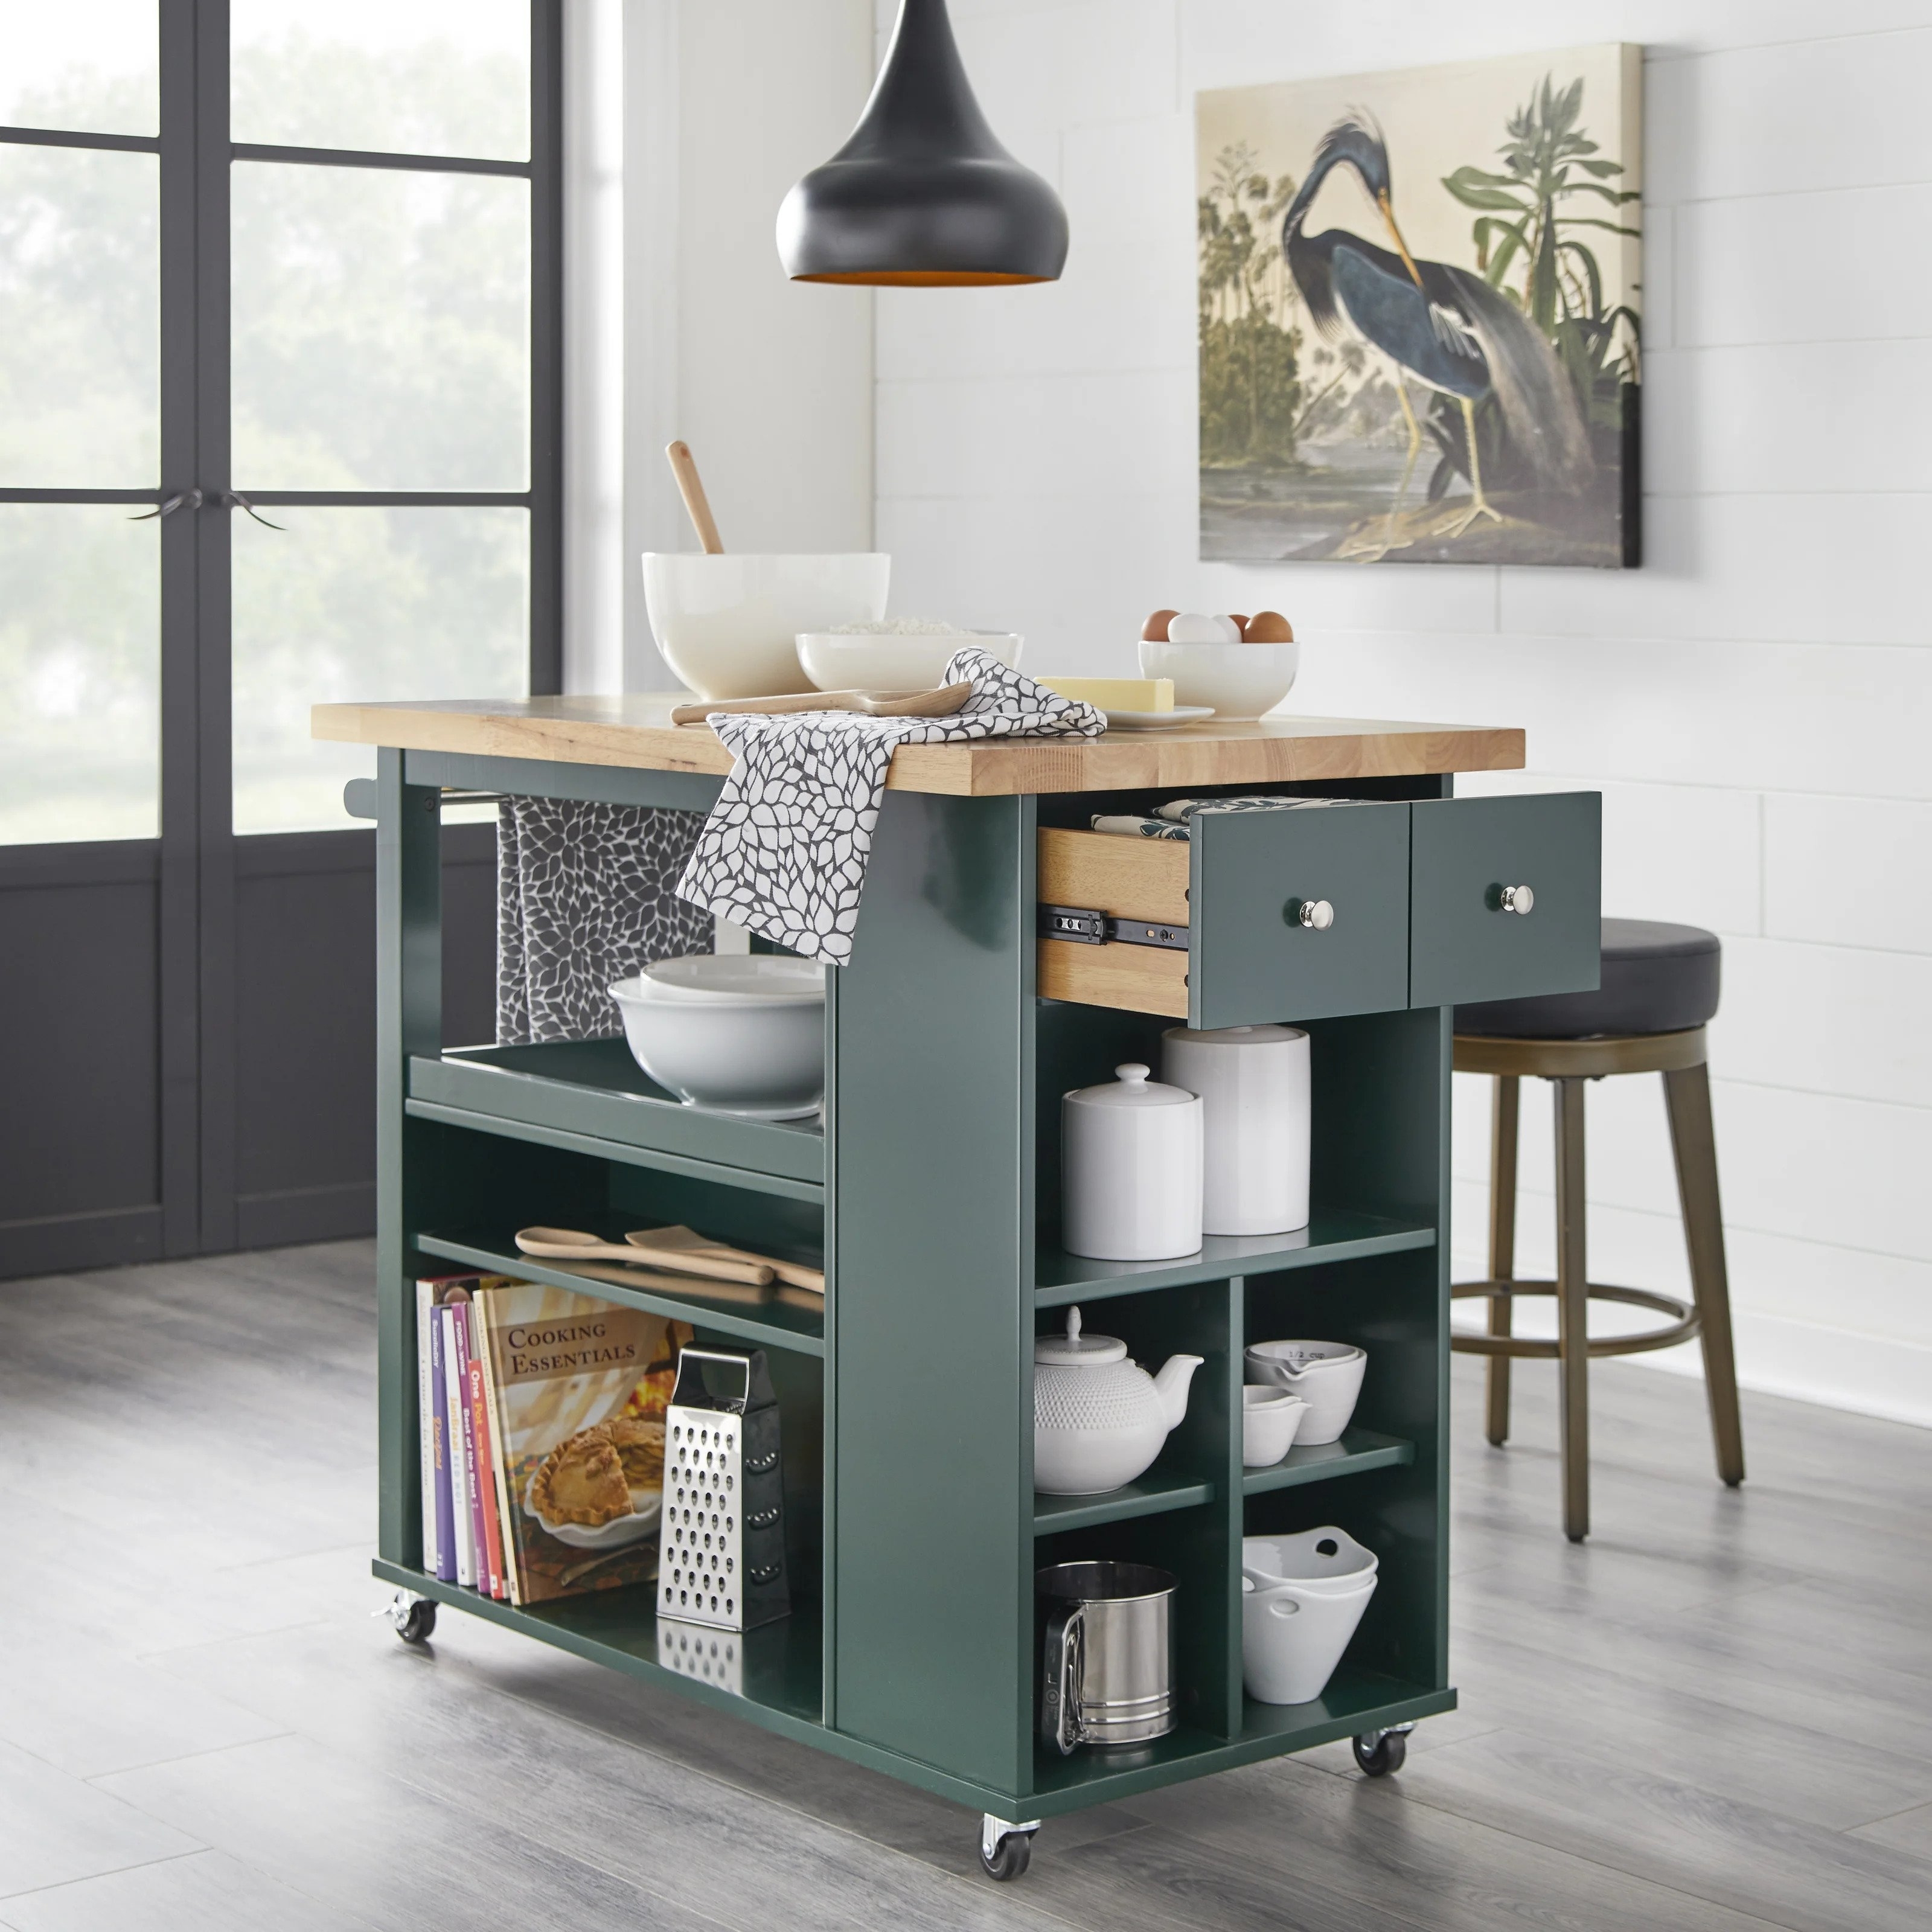 The cart in dark green, featuring a natural wood top and silver pulls